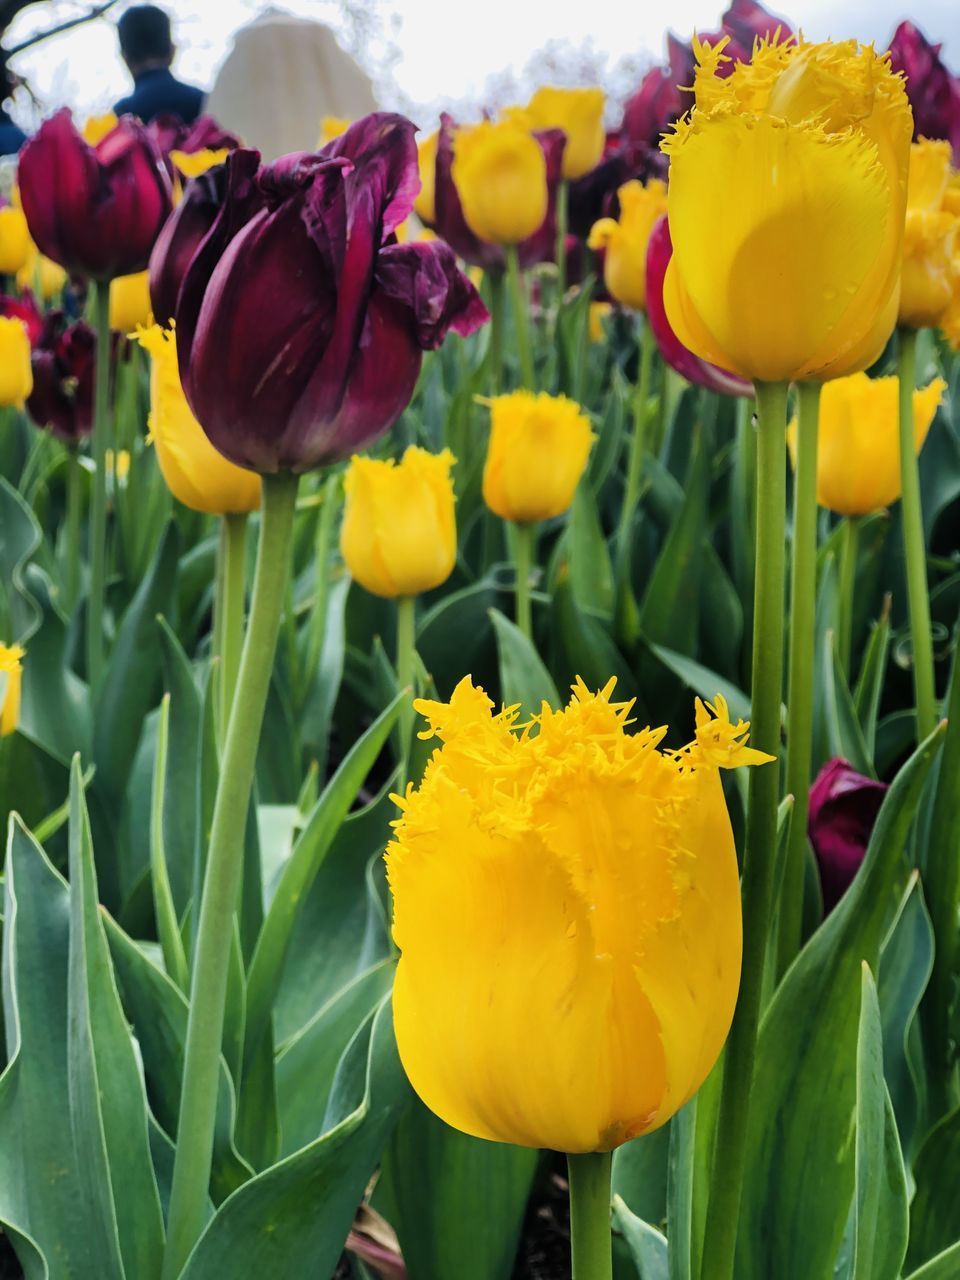 CLOSE-UP OF YELLOW TULIP FLOWERS